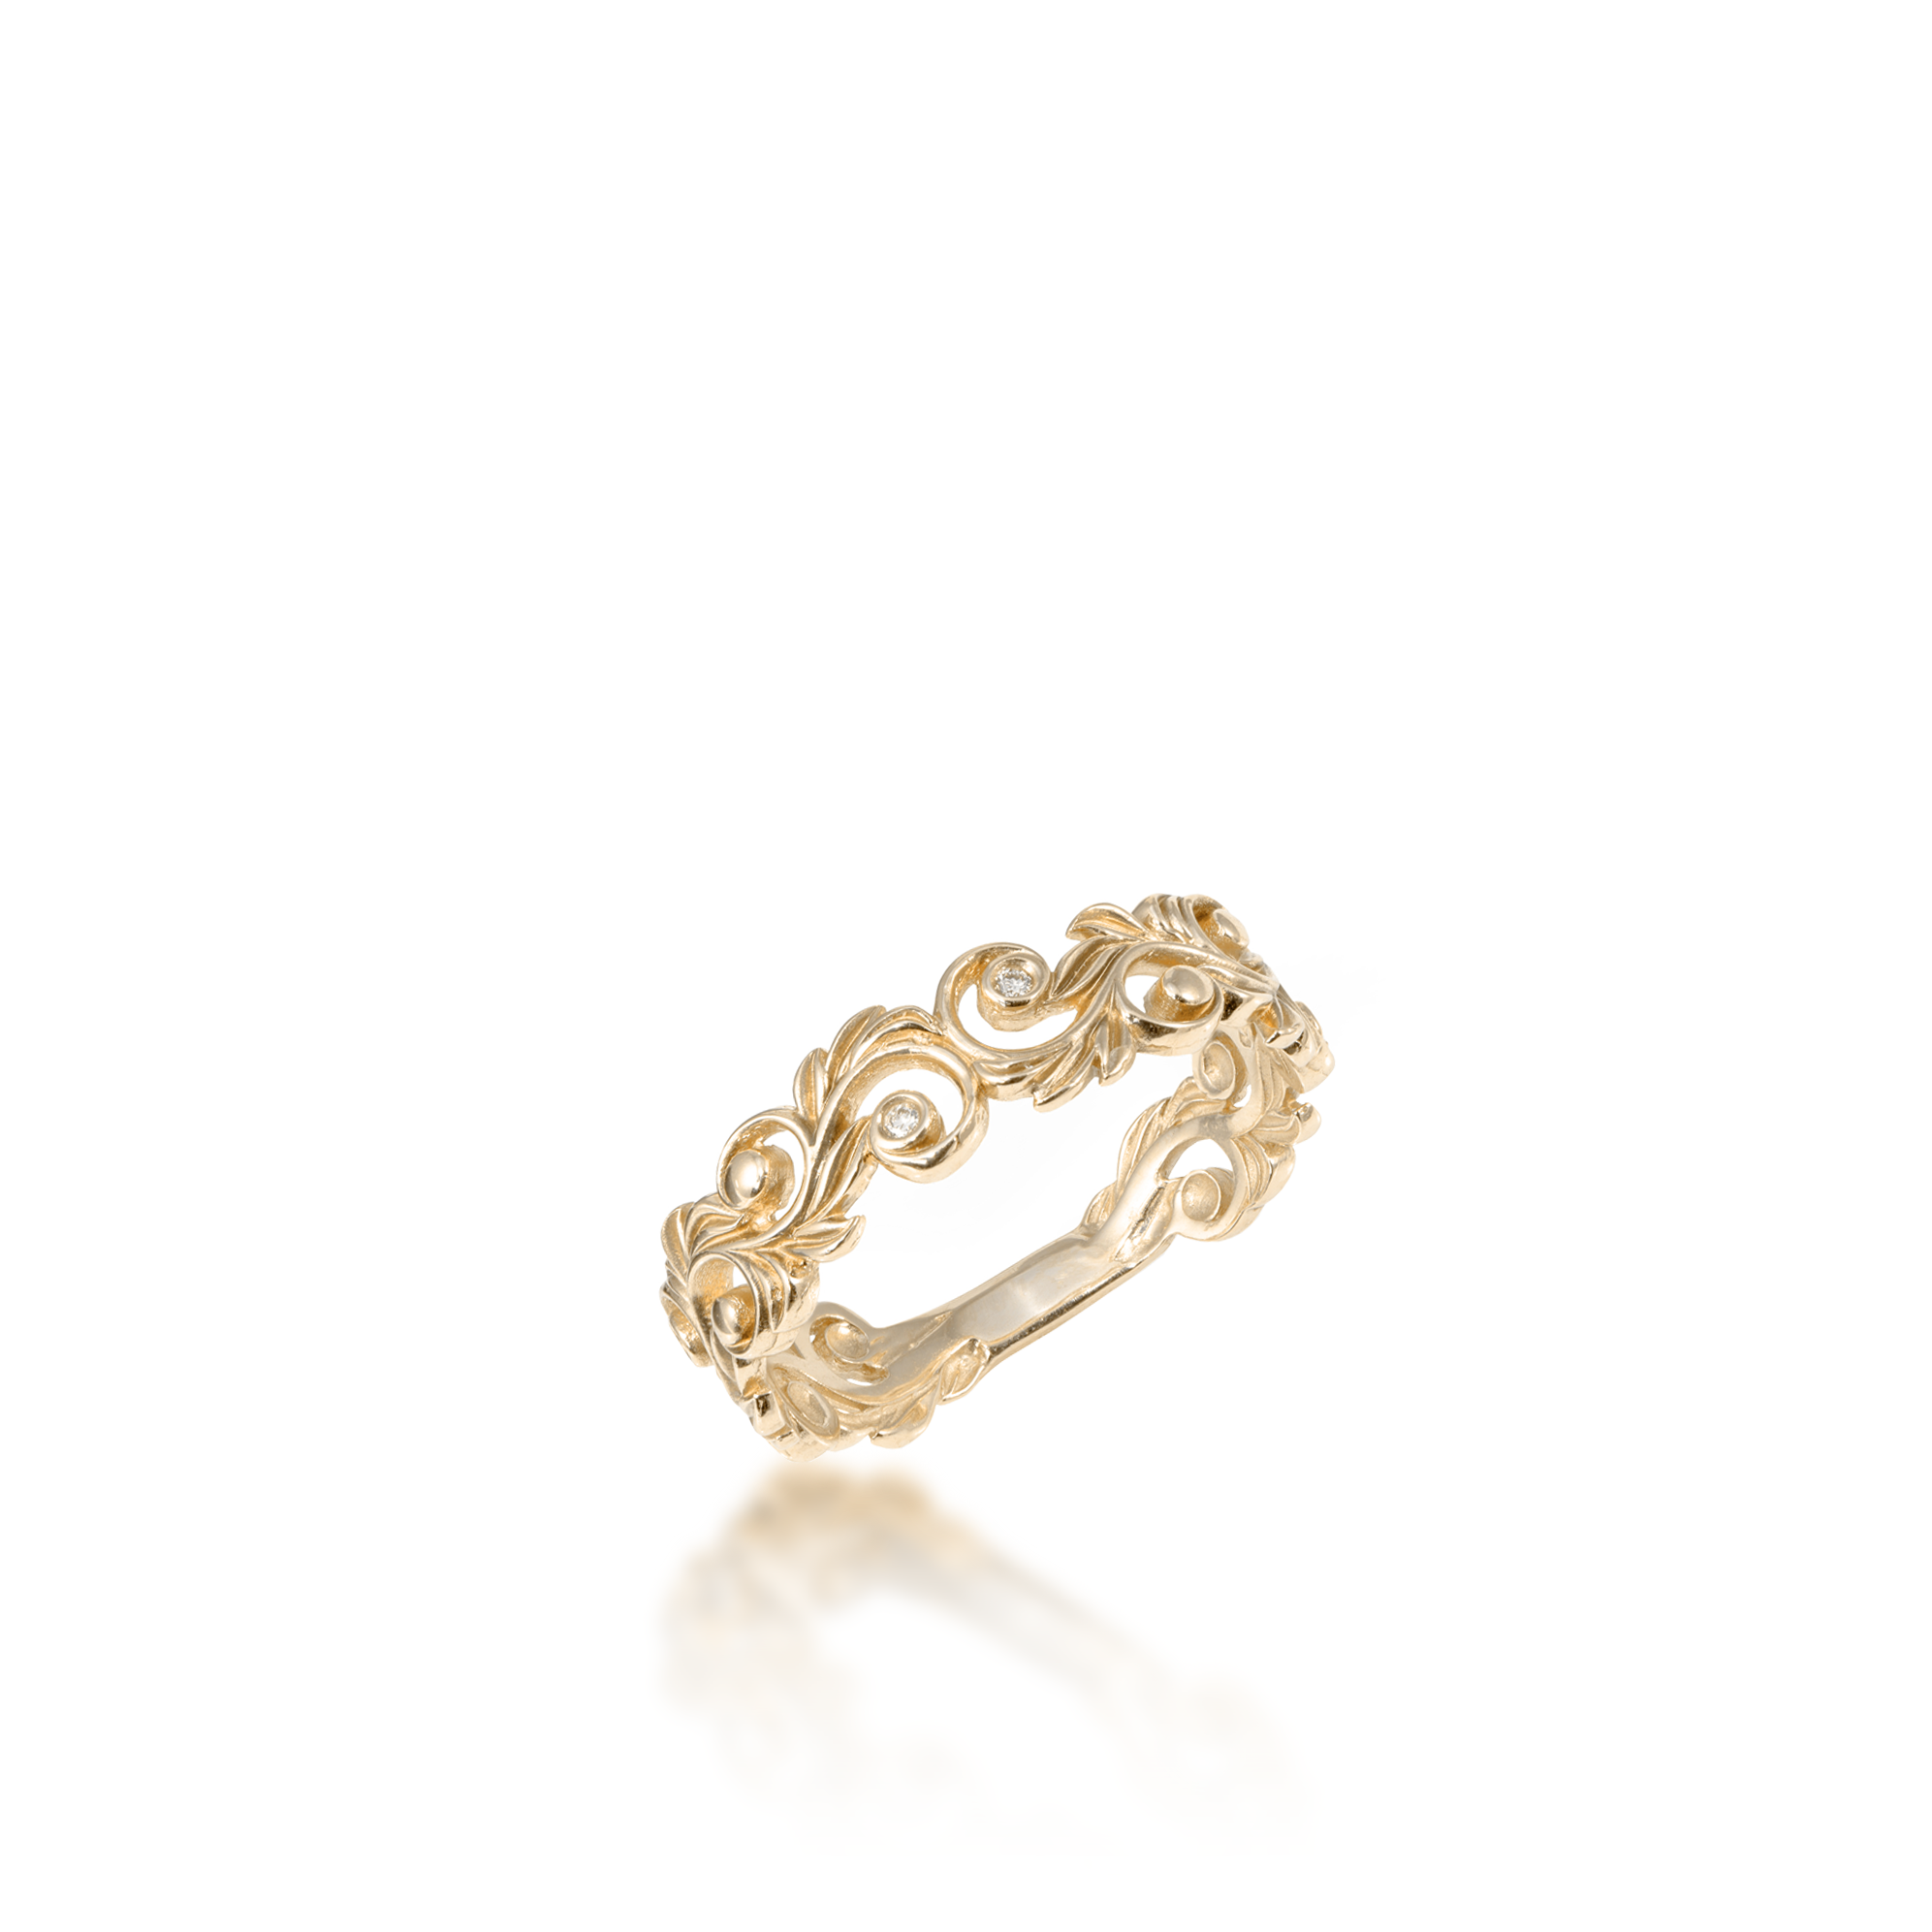 Living Heirloom Ring in Gold with Diamonds - 6mm